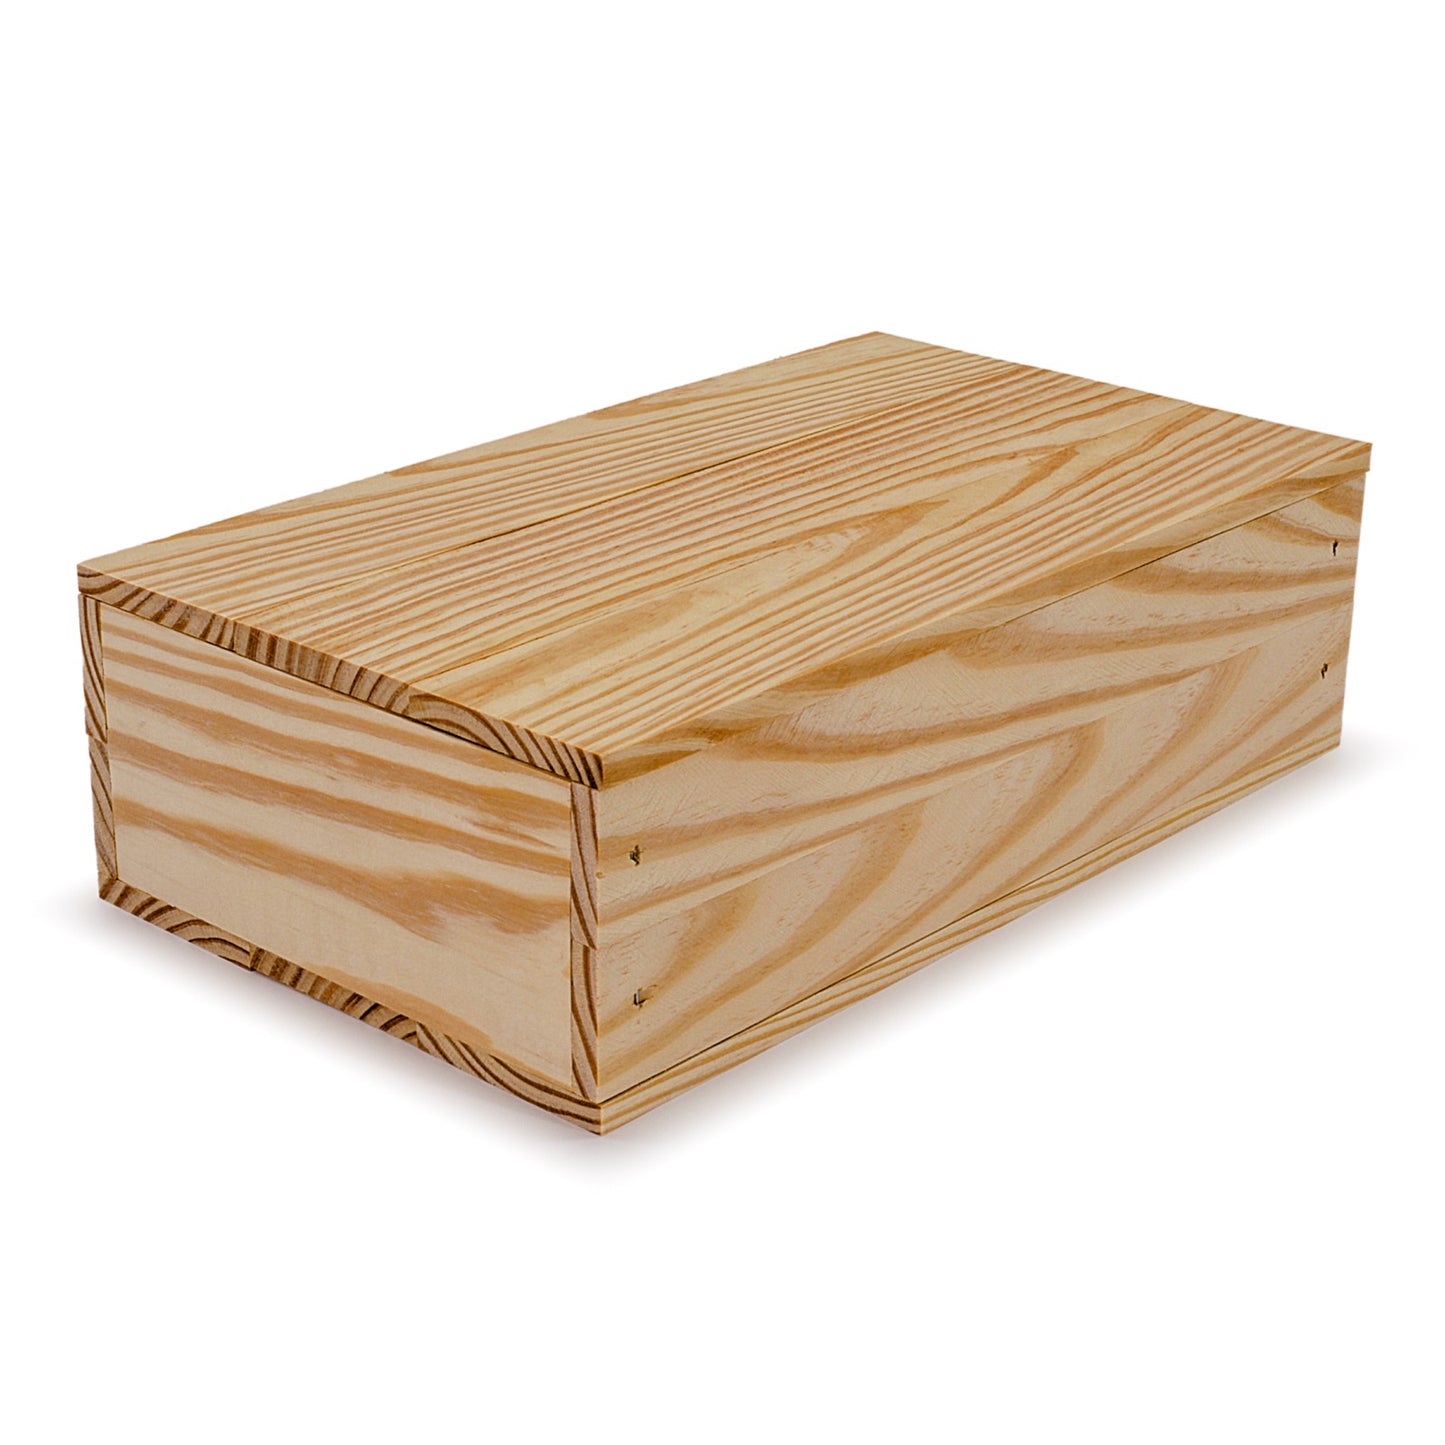 Small wooden crate with lid 13x7.5x3.5, 6-BX-13-7.5-3.5-NX-NW-LL, 12-BX-13-7.5-3.5-NX-NW-LL, 24-BX-13-7.5-3.5-NX-NW-LL, 48-BX-13-7.5-3.5-NX-NW-LL, 96-BX-13-7.5-3.5-NX-NW-LL